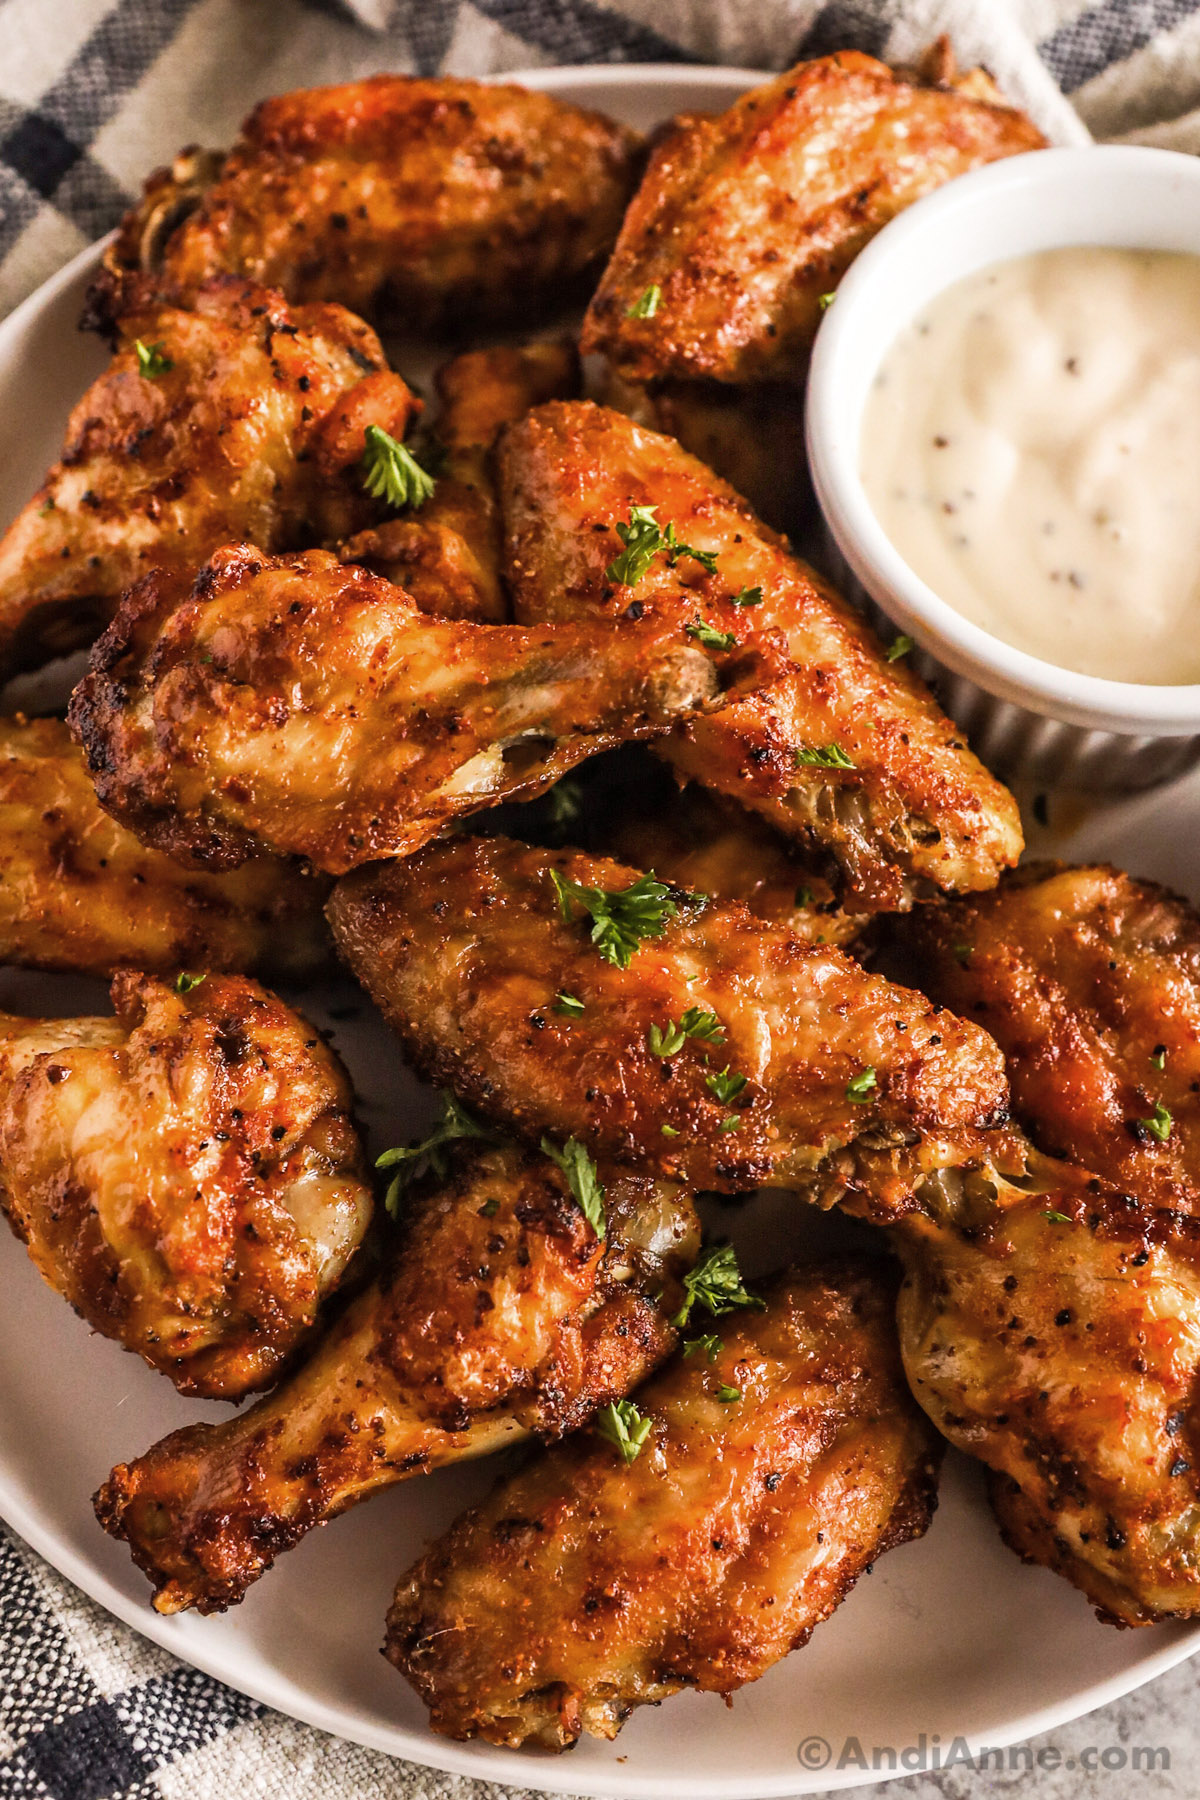 Chicken wings on a plate with a small cup of ranch dressing.